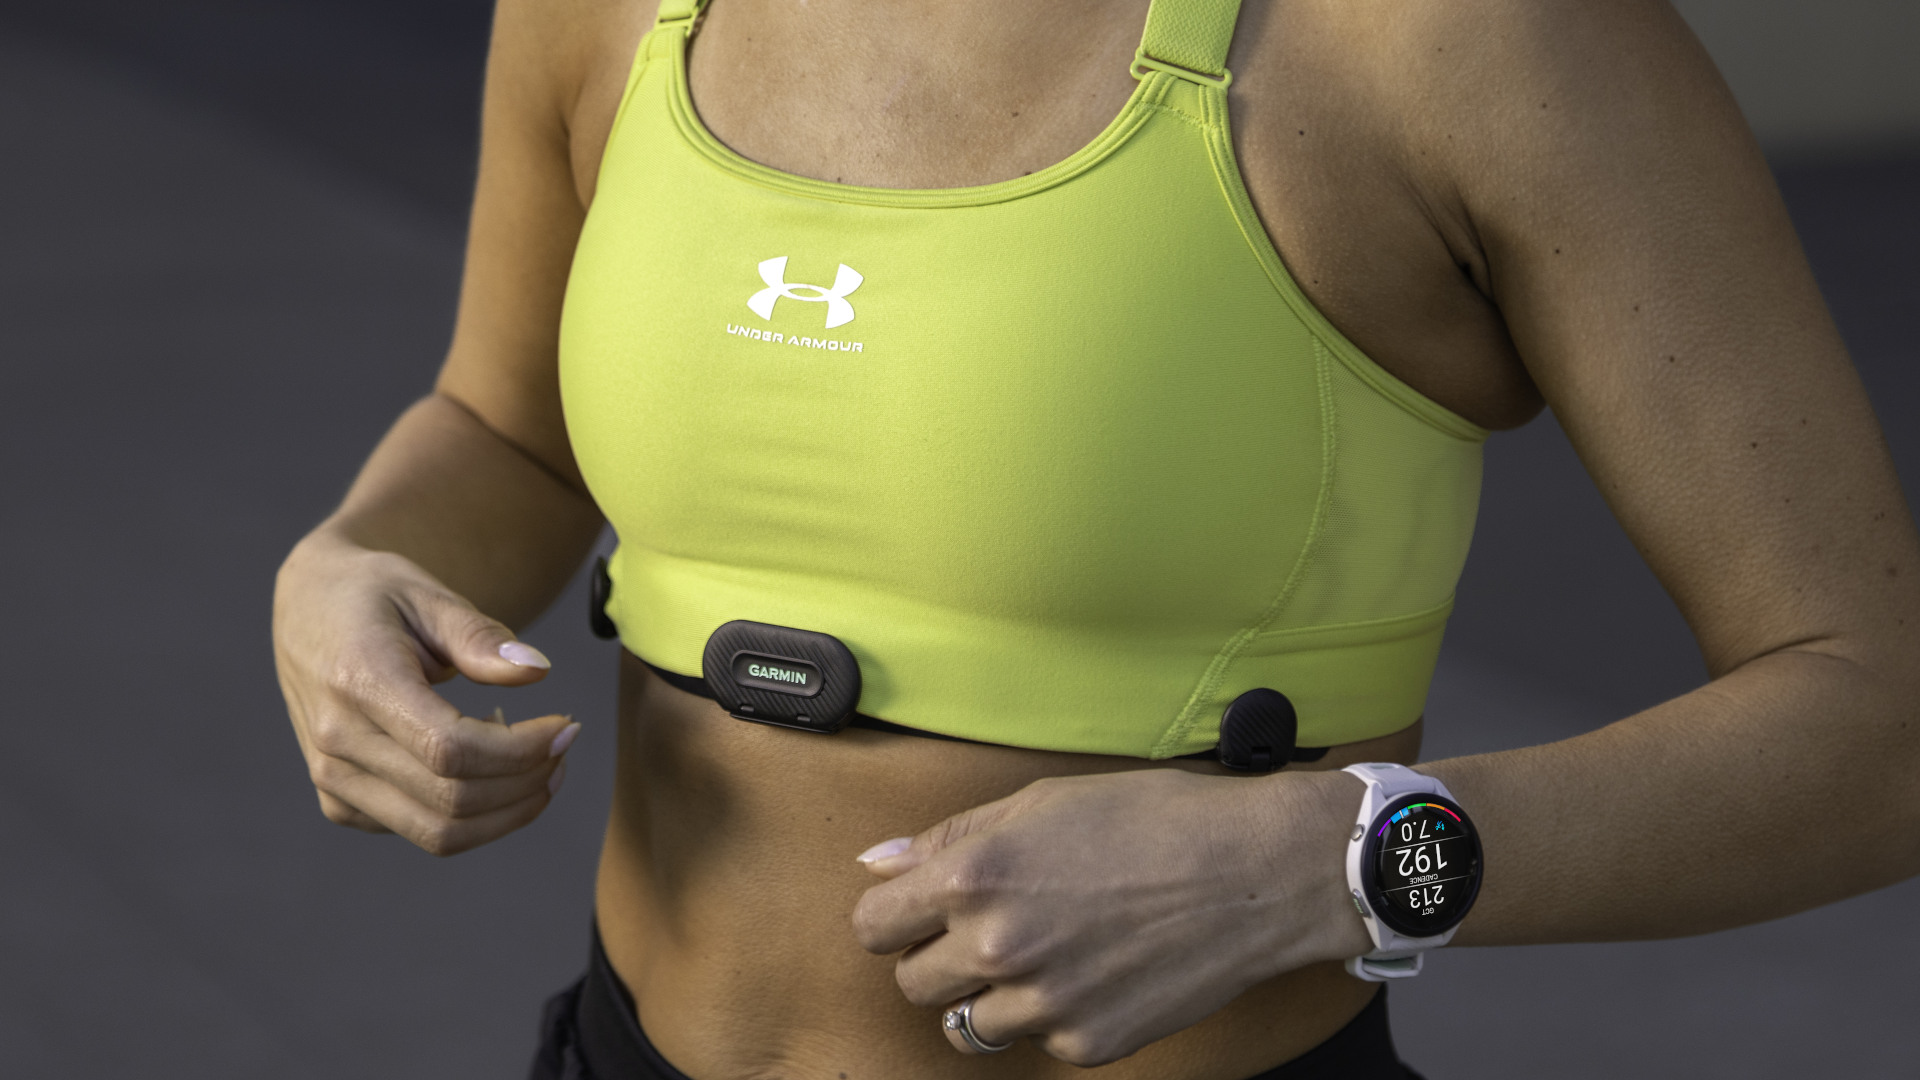 The Garmin HRM-Fit heart rate monitor.